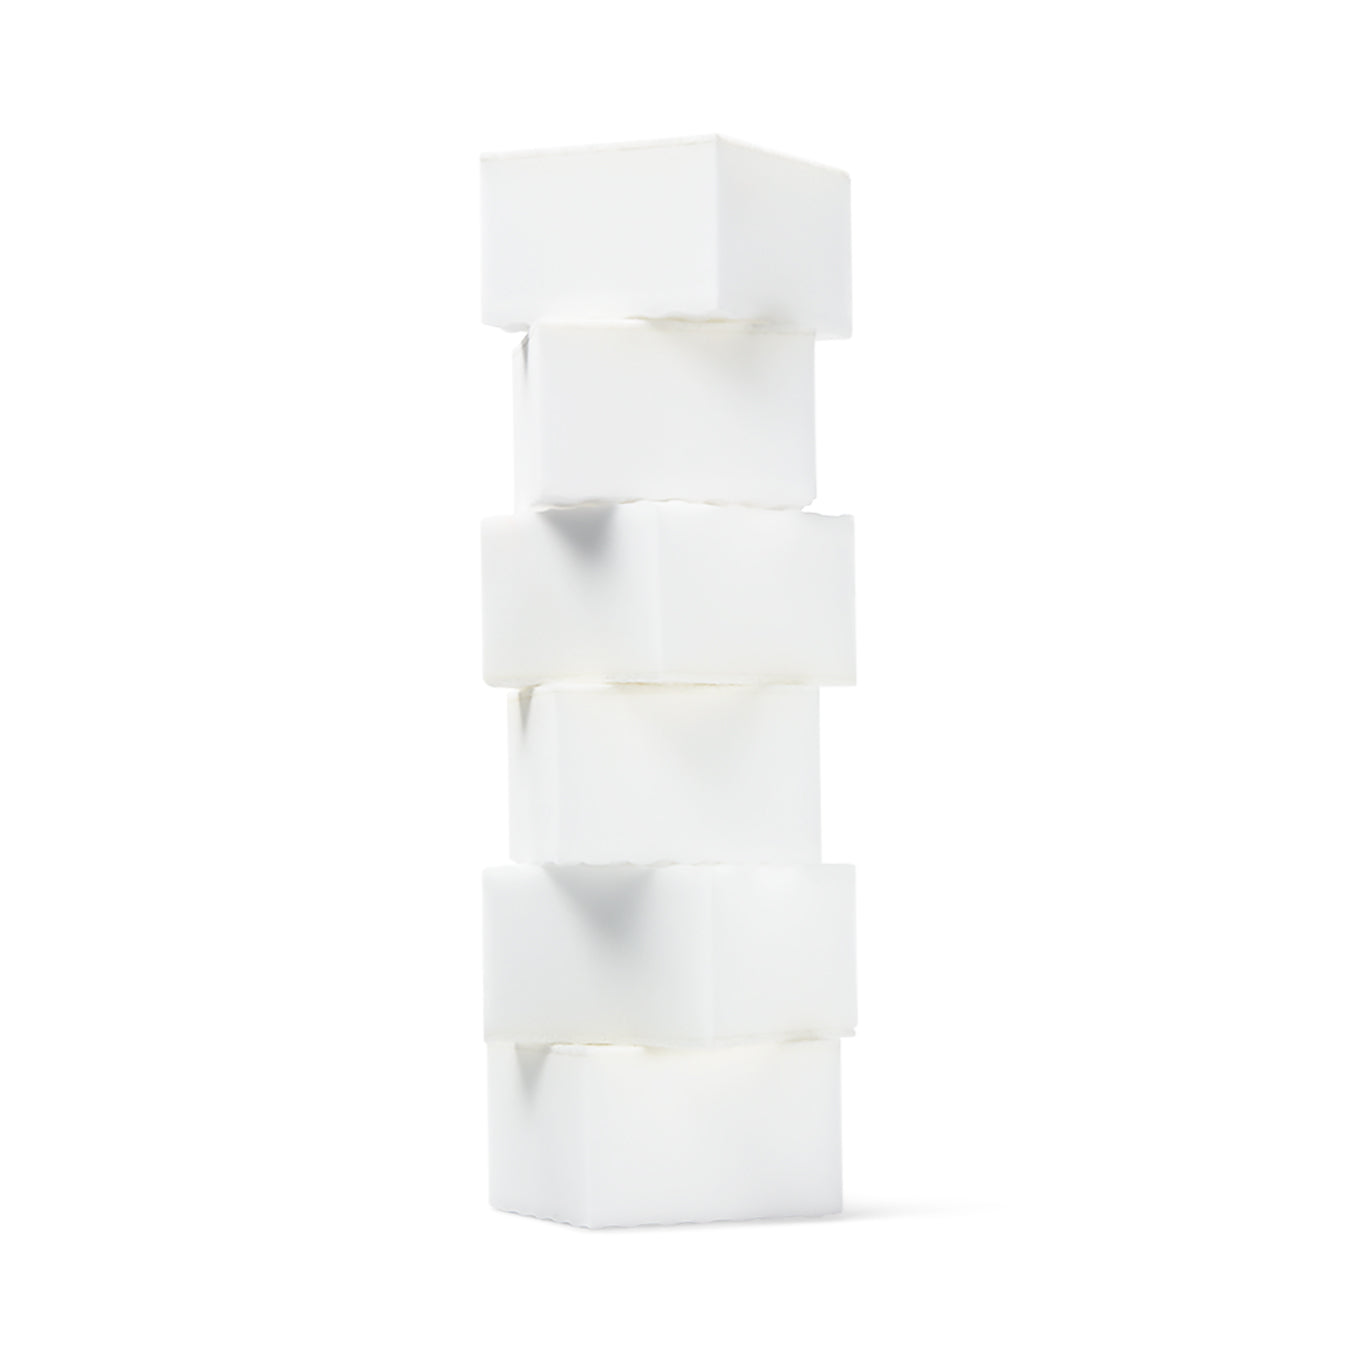 A stack of 6 shoe cleaning sponges on a white background.